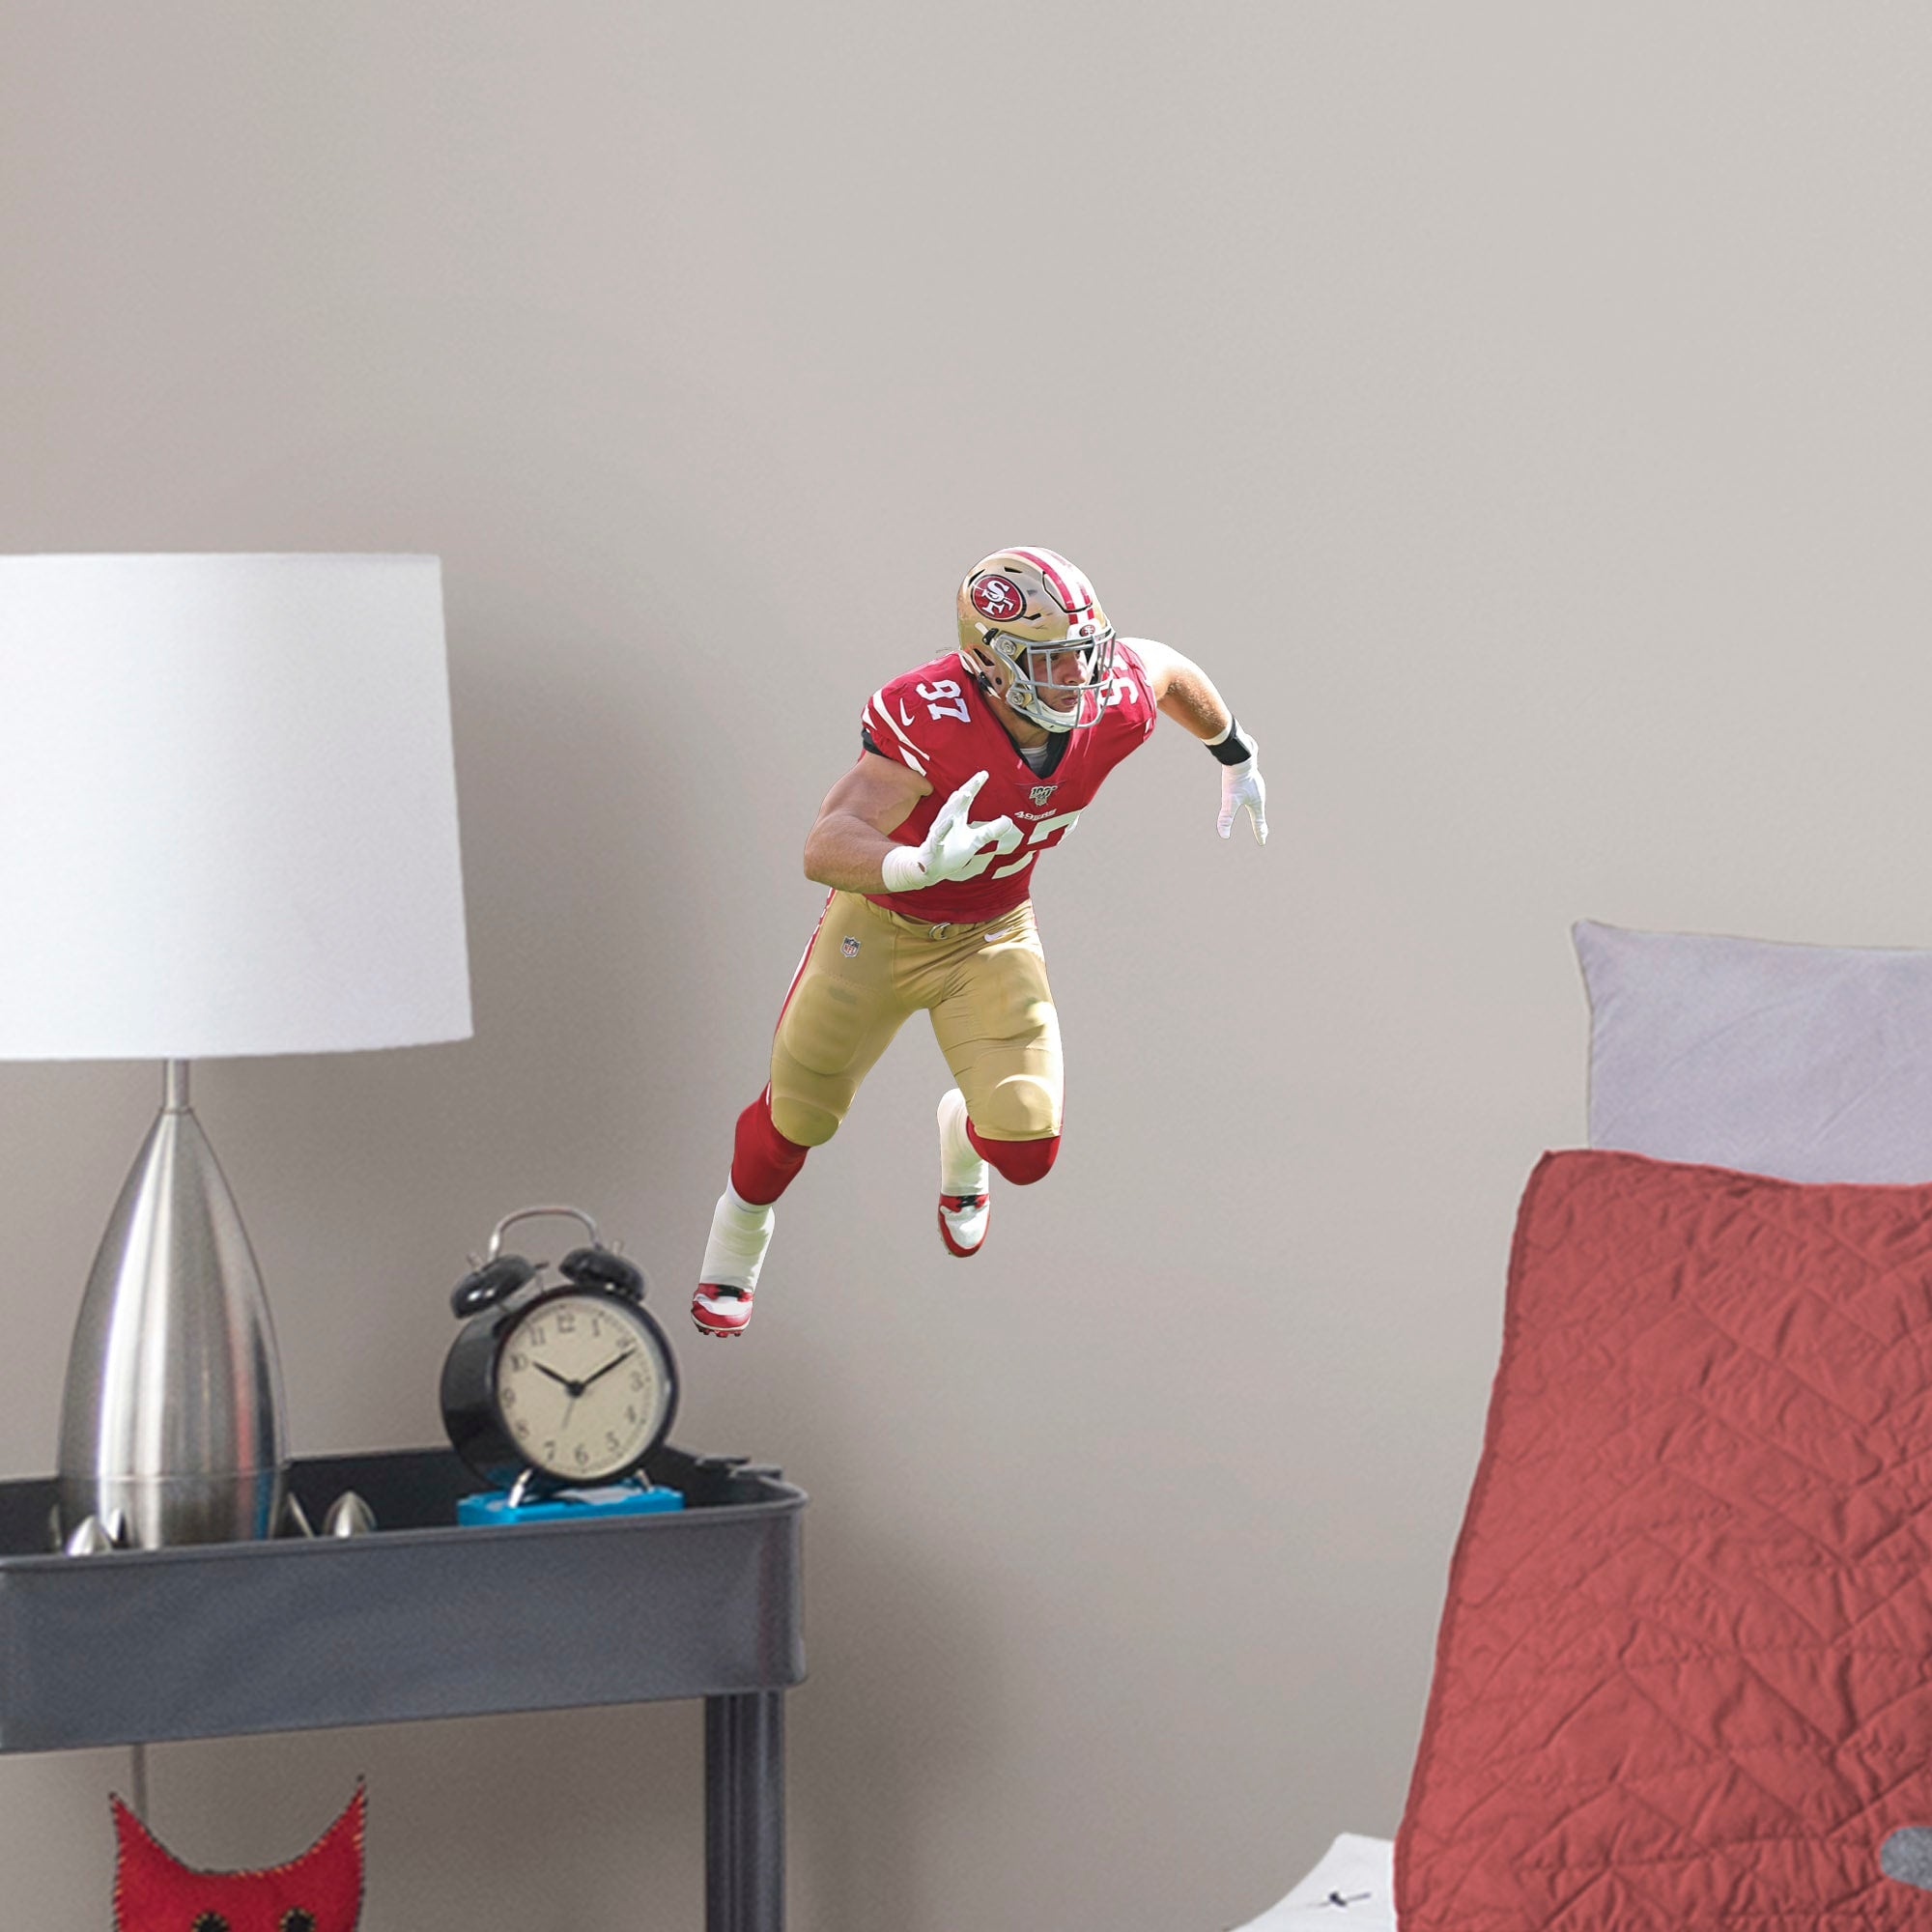 Nick Bosa for San Francisco 49ers - Officially Licensed NFL Removable Wall Decal Large by Fathead | Vinyl